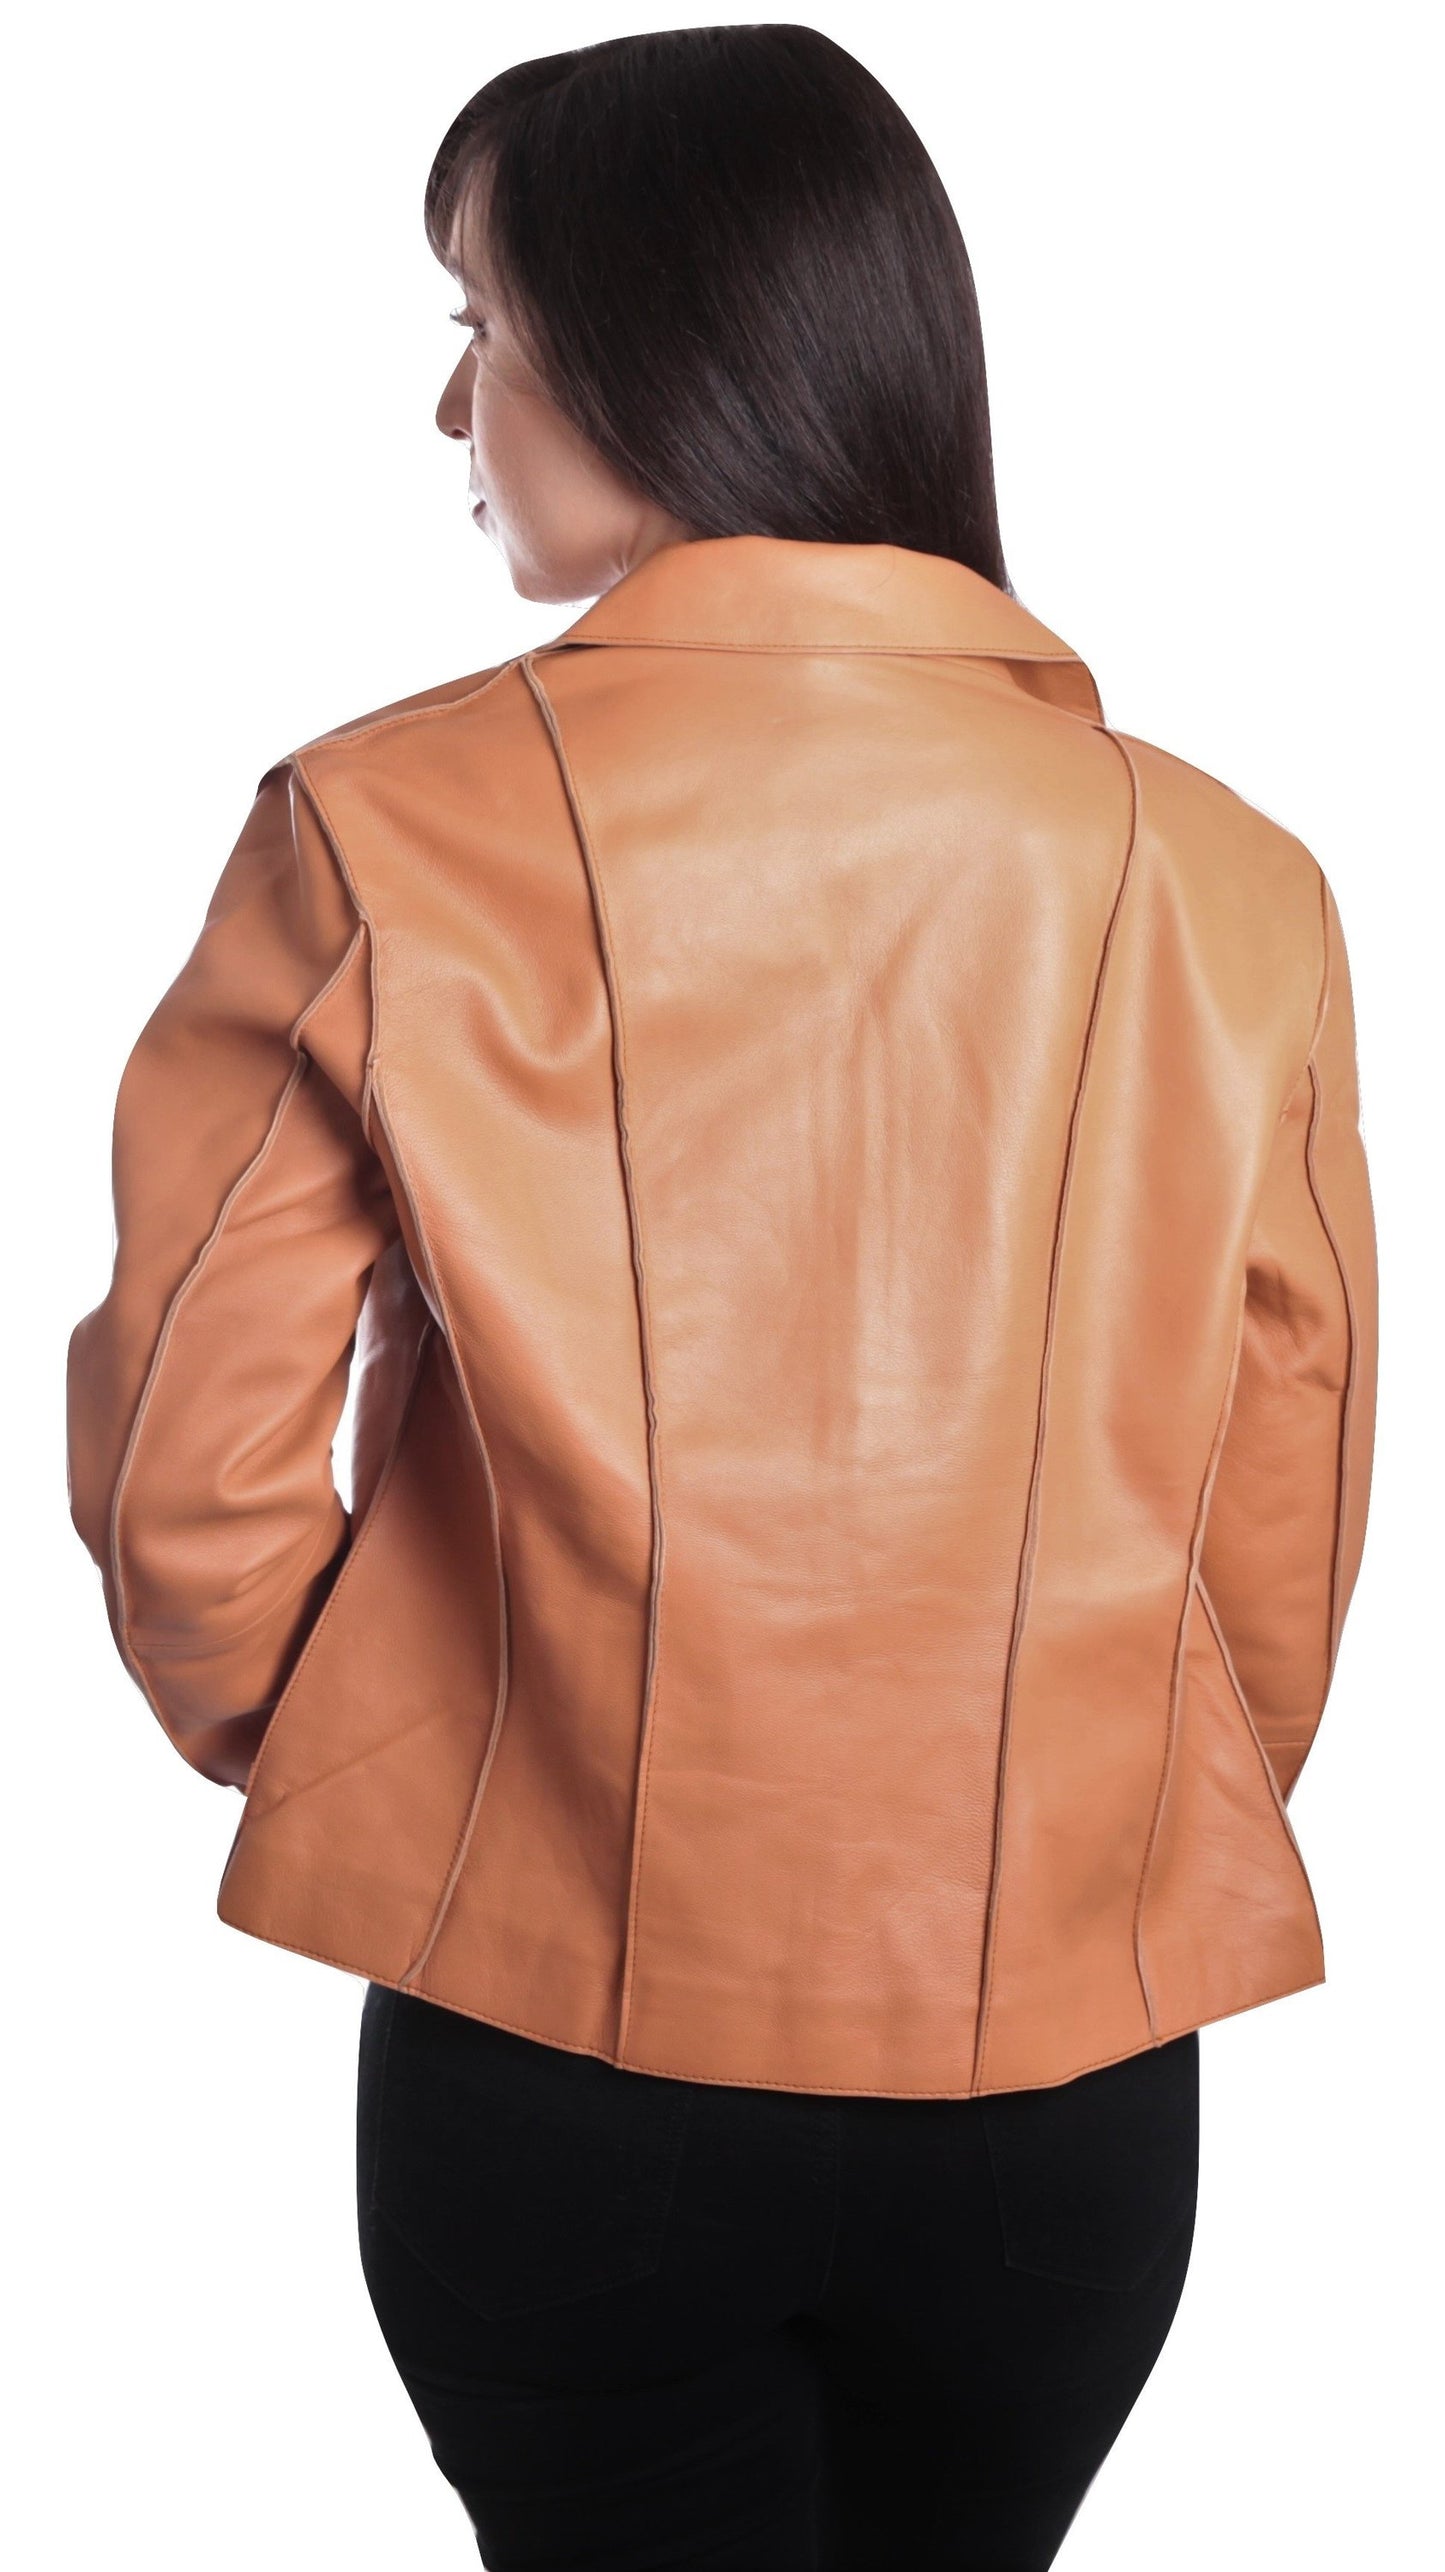 Picture of a Women's Professional Stunner Sheepskin Leather Jacket orange back view